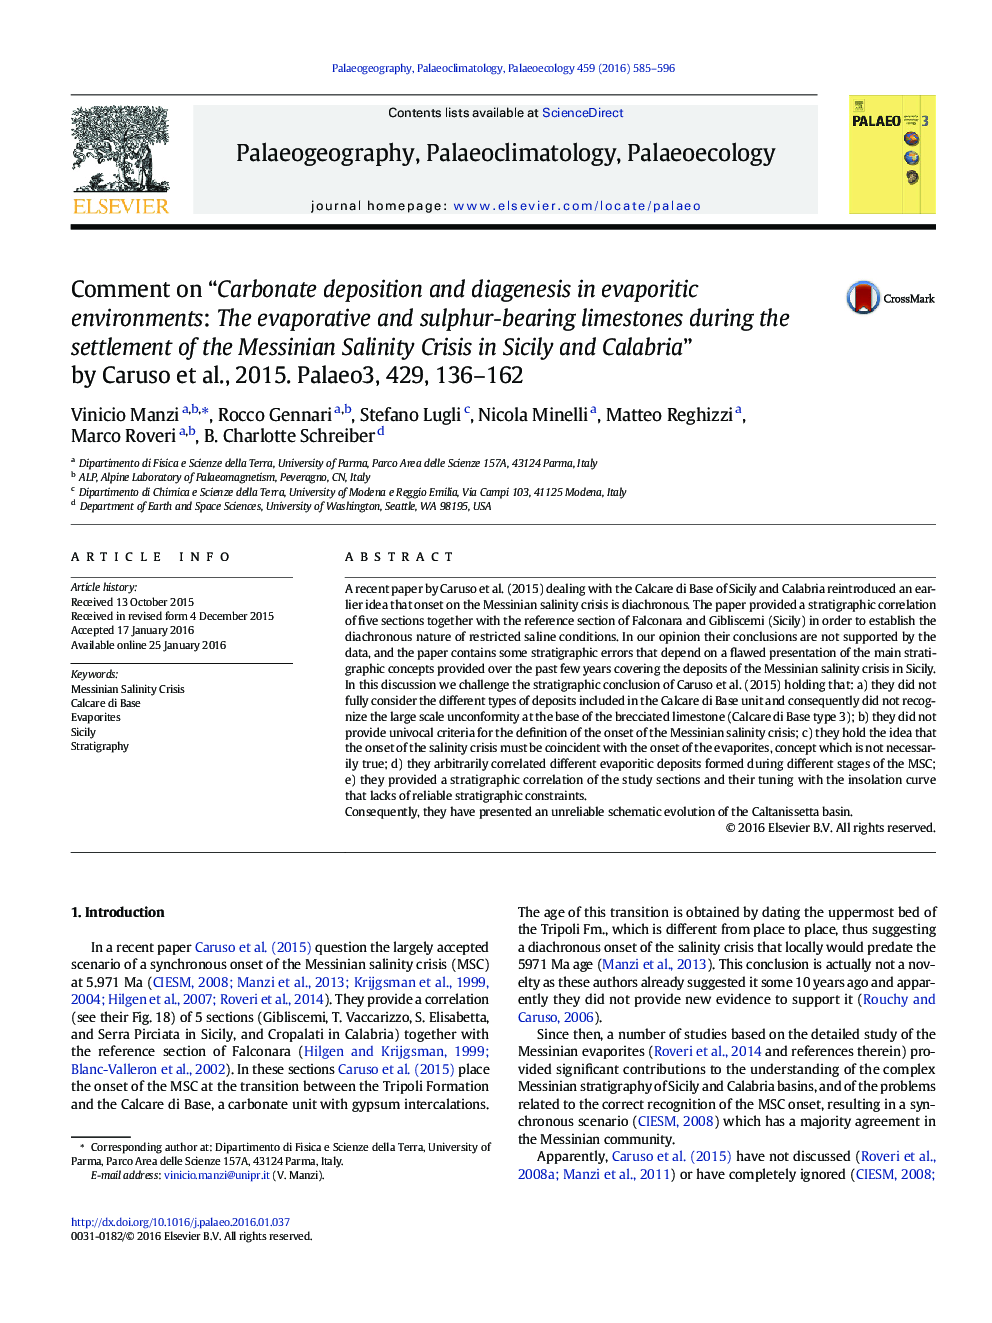 Comment on “Carbonate deposition and diagenesis in evaporitic environments: The evaporative and sulphur-bearing limestones during the settlement of the Messinian Salinity Crisis in Sicily and Calabria” by Caruso et al., 2015. Palaeo3, 429, 136–162